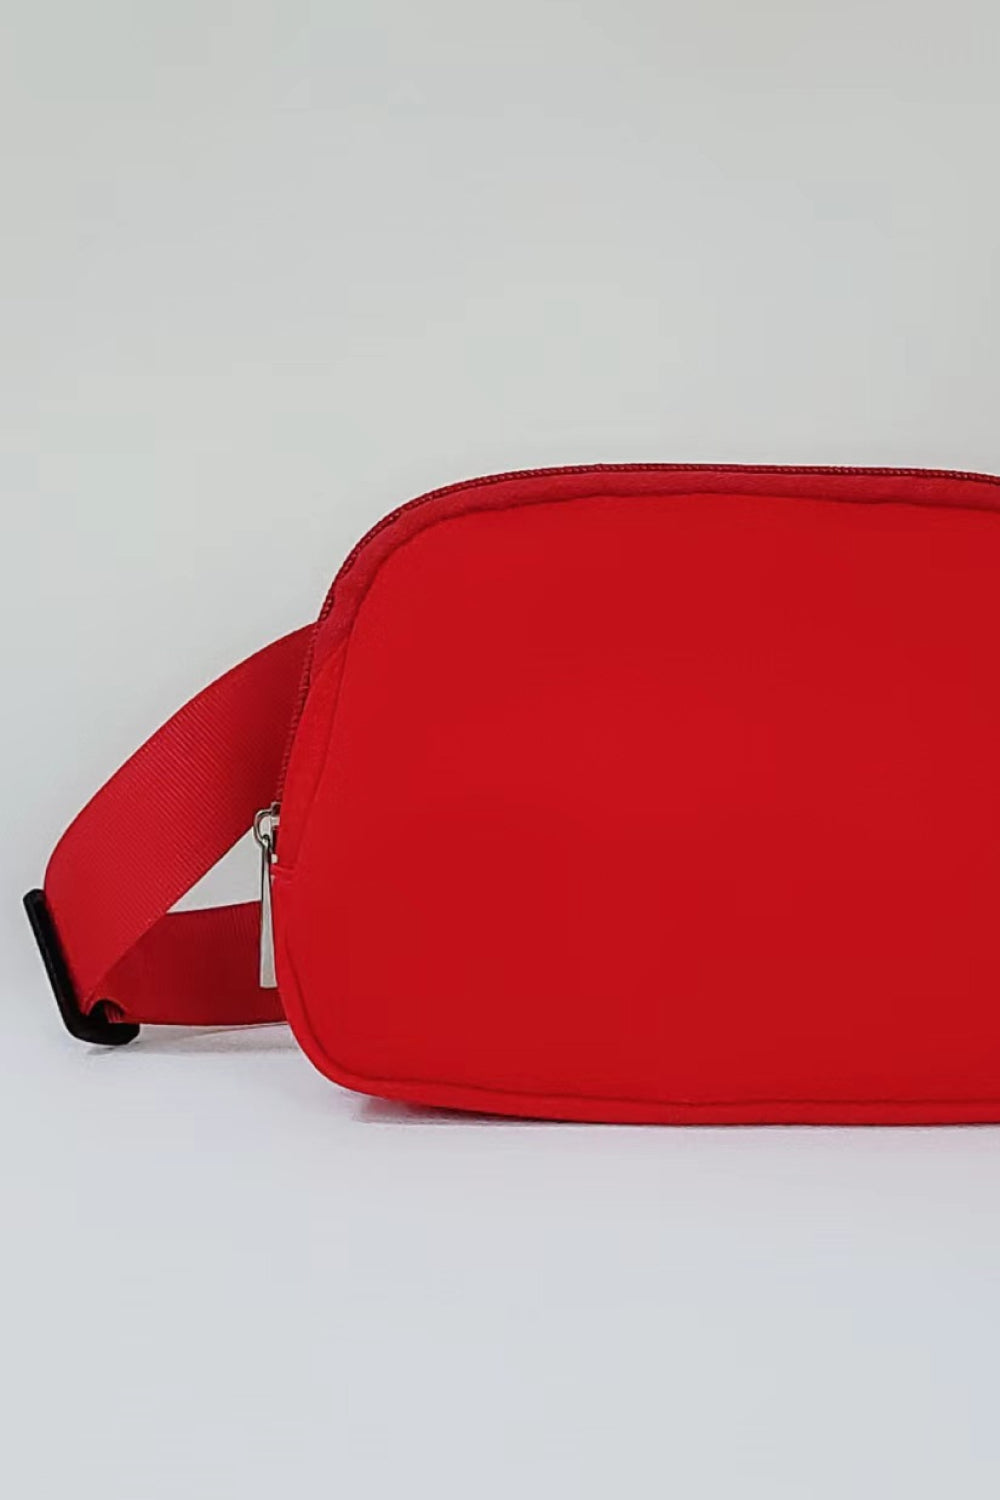 Buckle Zip Closure Fanny Pack in Multiple Colors  Southern Soul Collectives 